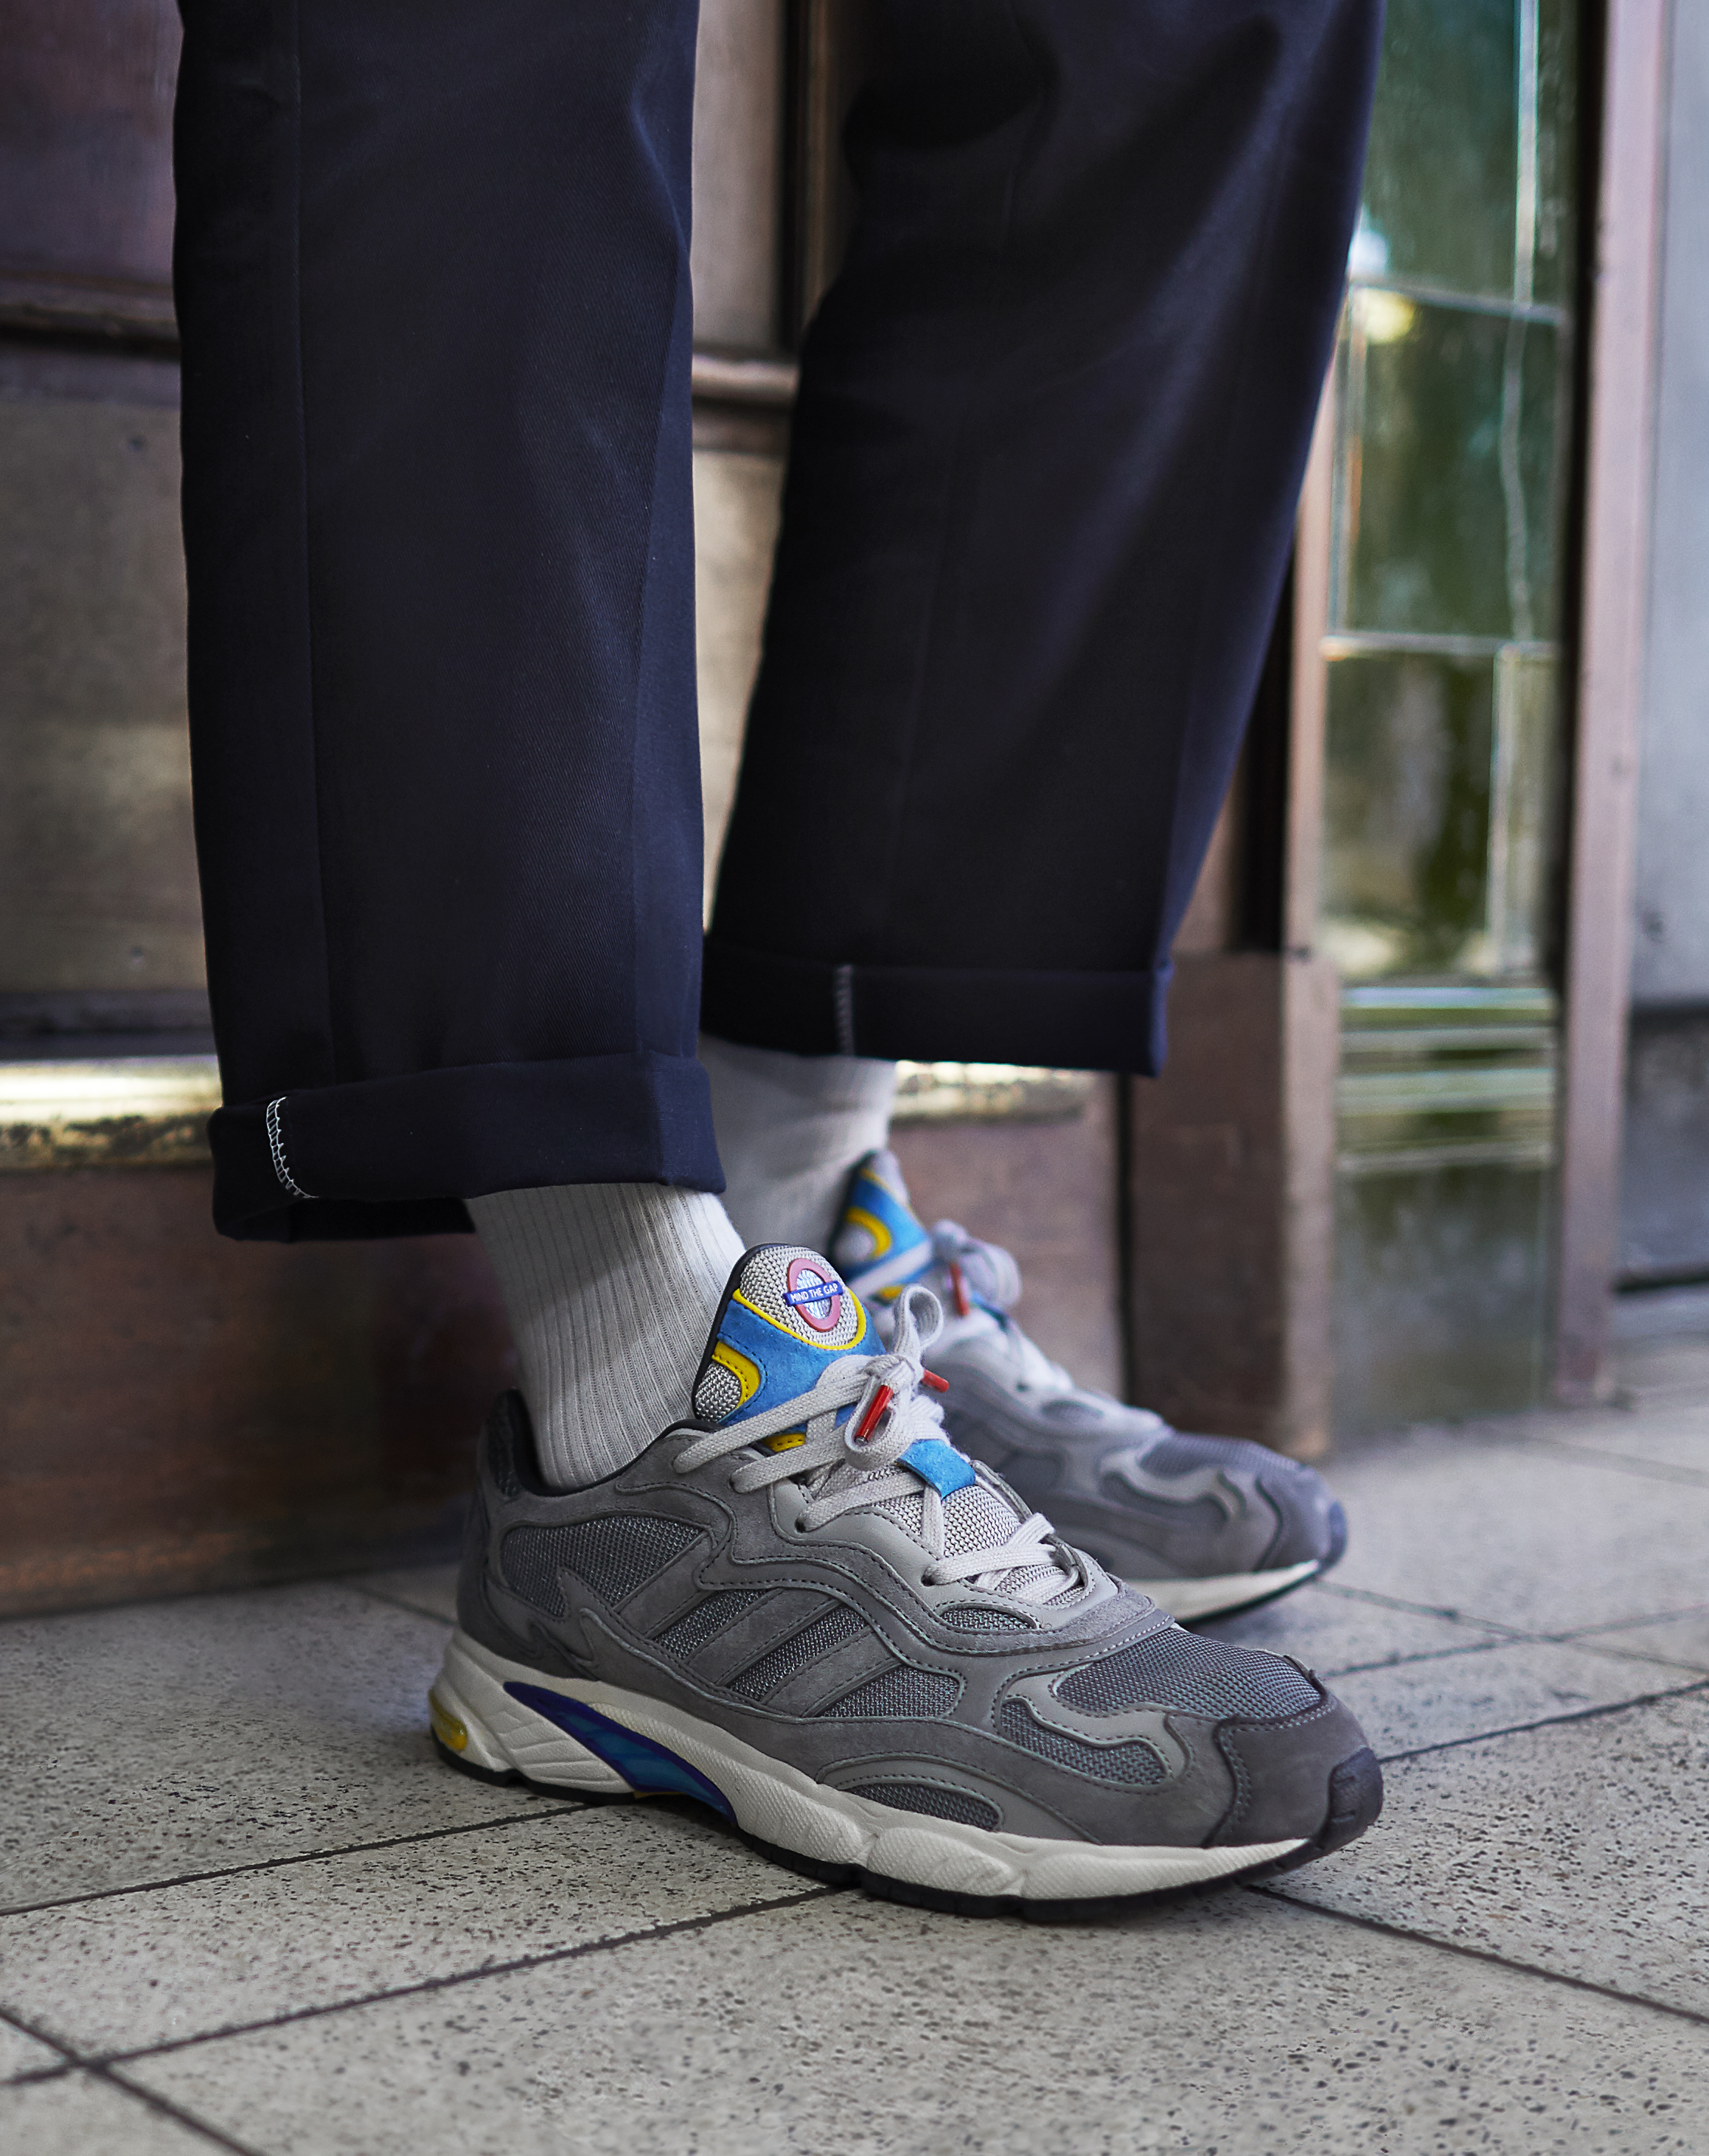 Transport for London offering Oyster card limited edition trainers | Shropshire Star